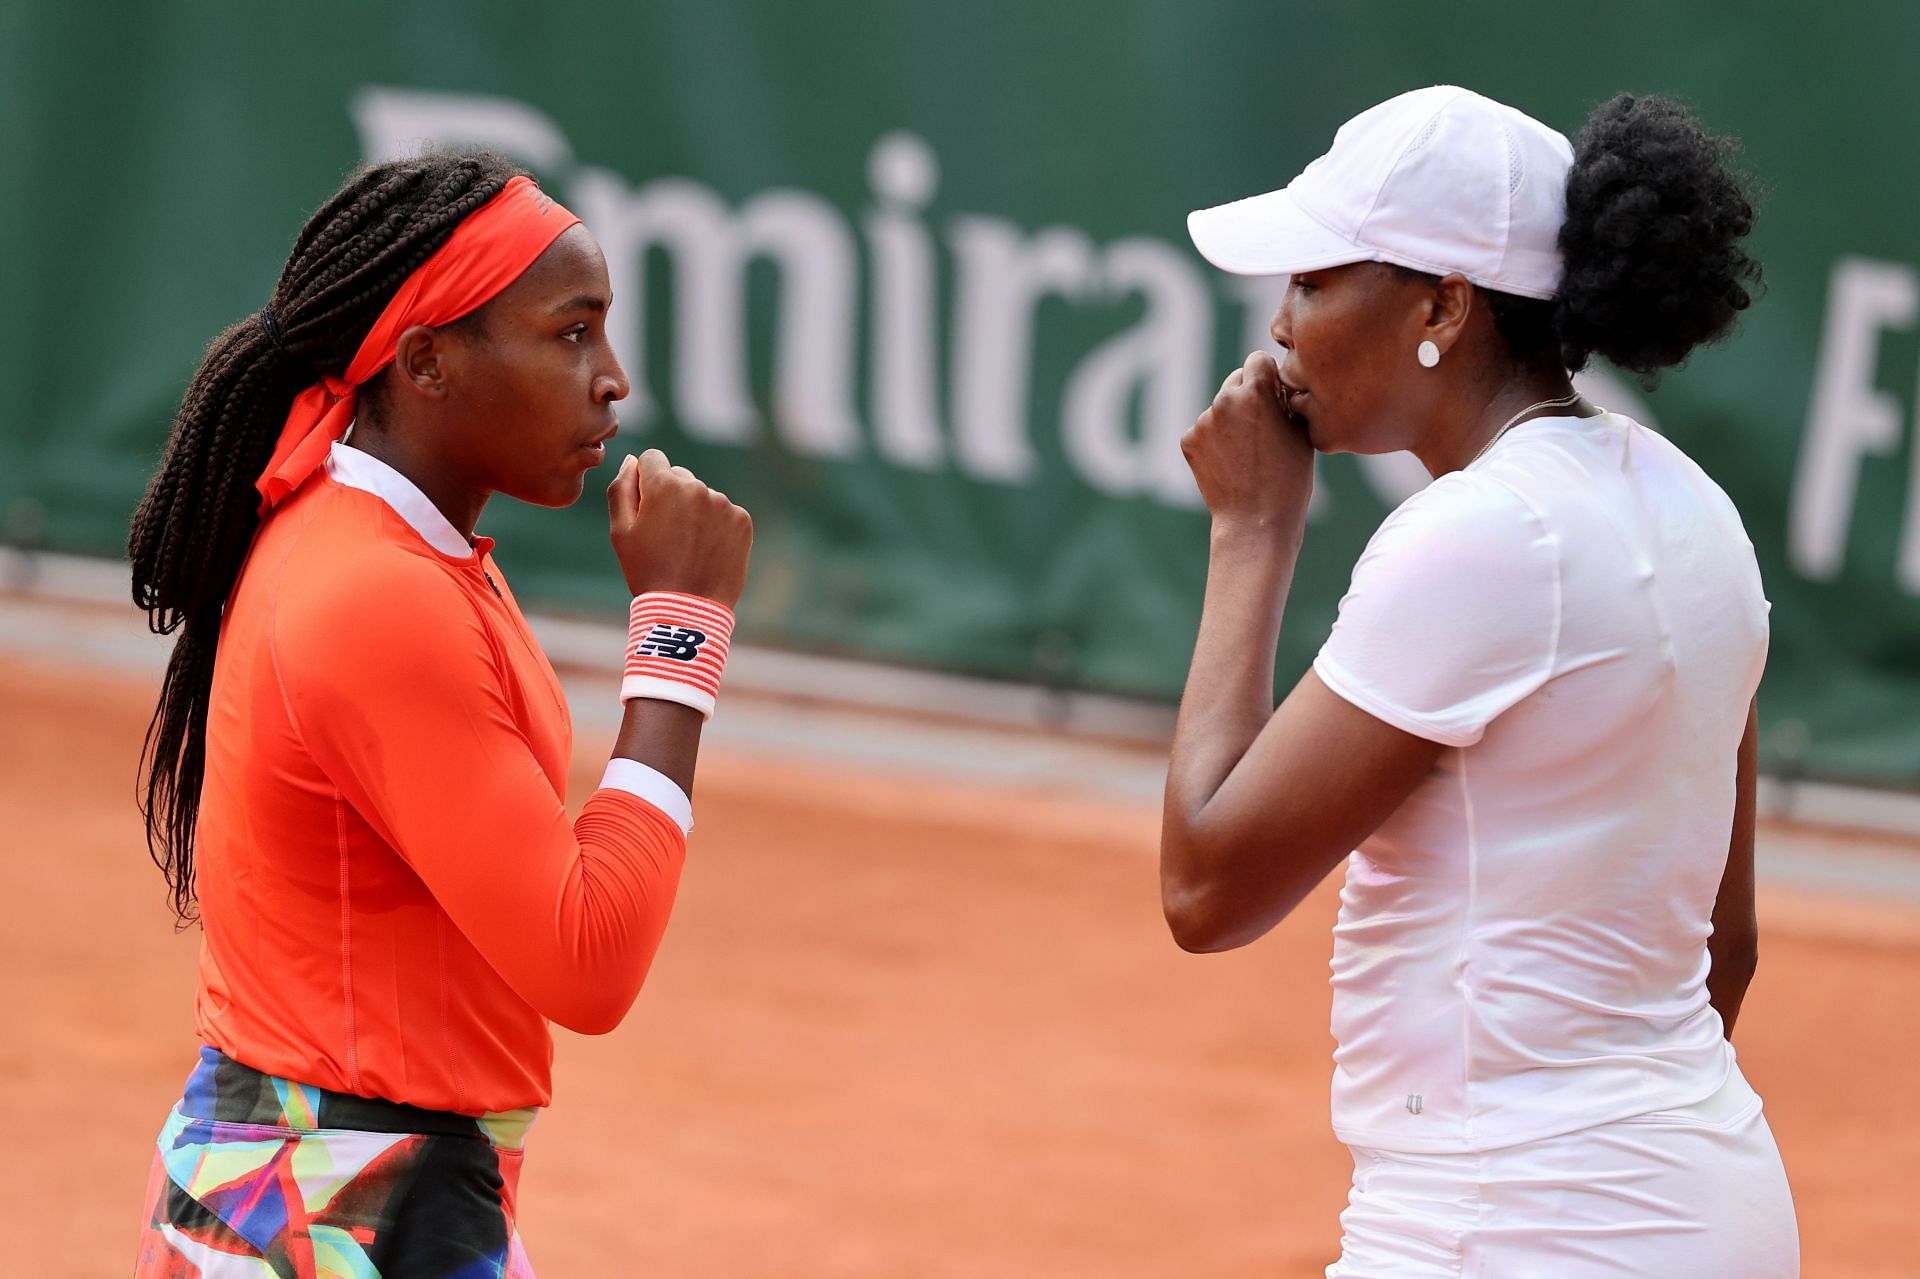 Coco Gauff partnered with Venus Williams to play doubles at the 2021 French Open